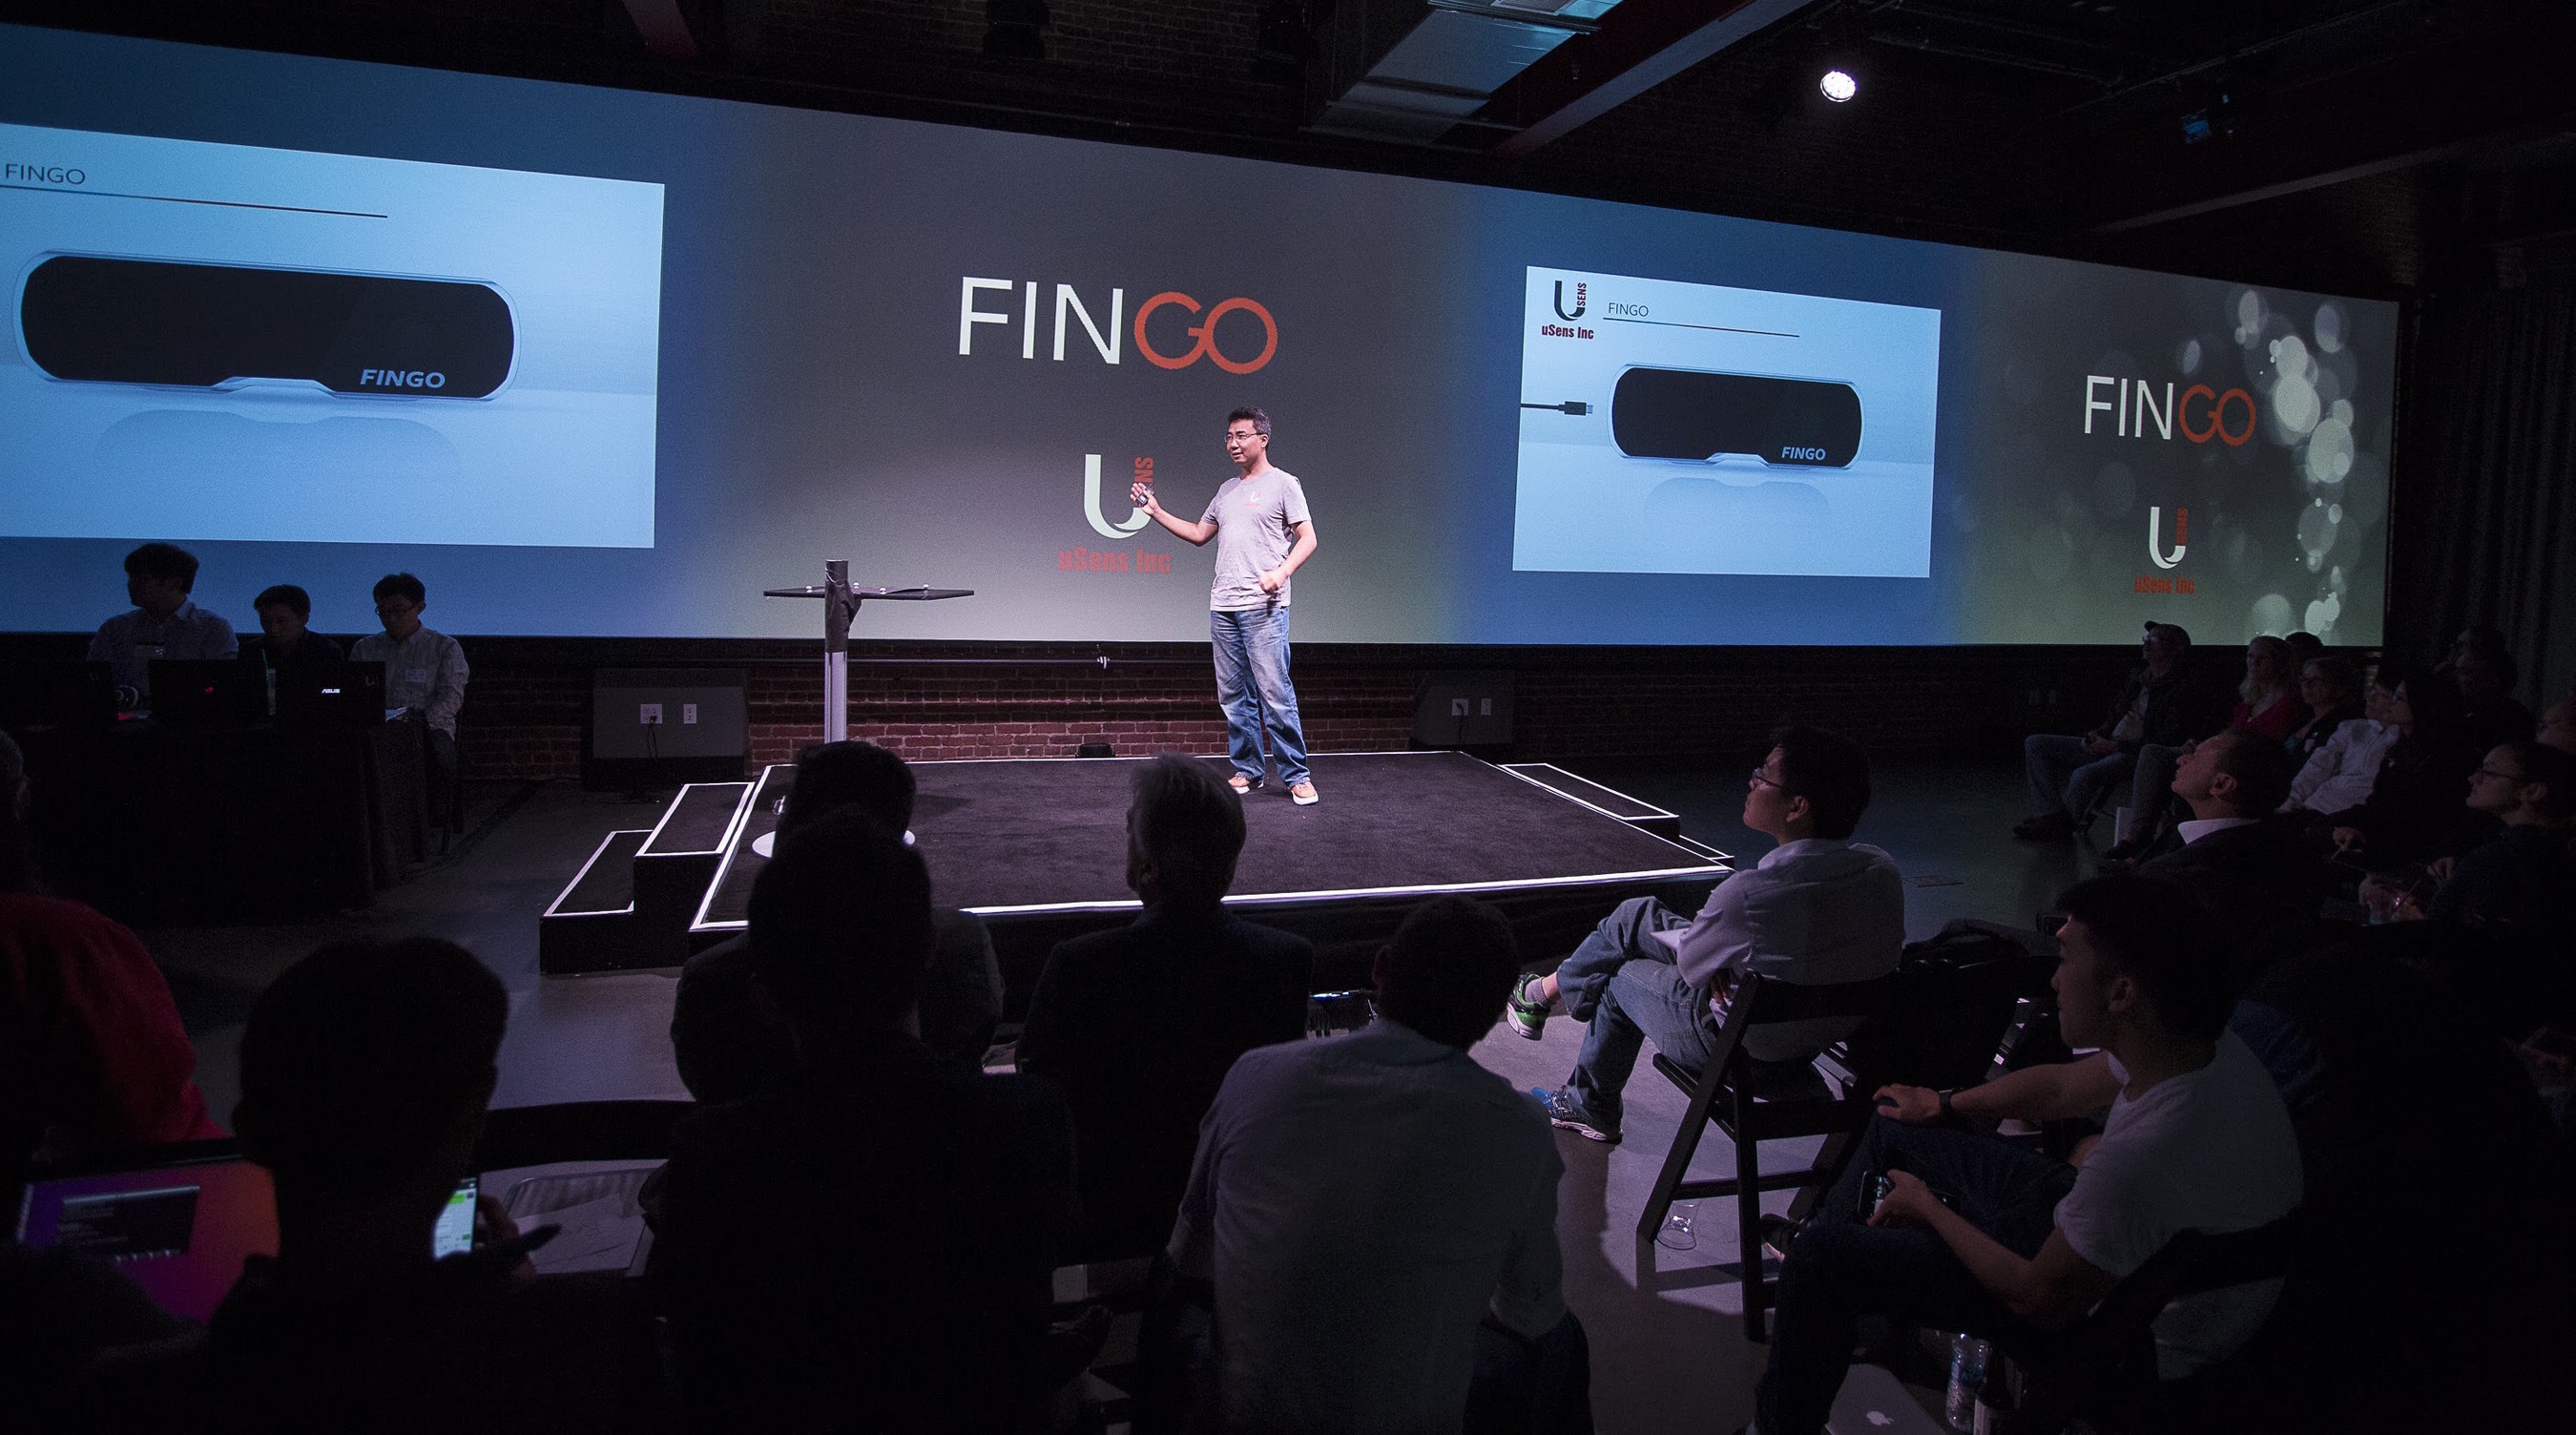 uSens CTO, Dr. Yue Fei announcing the new Fingo hardware series